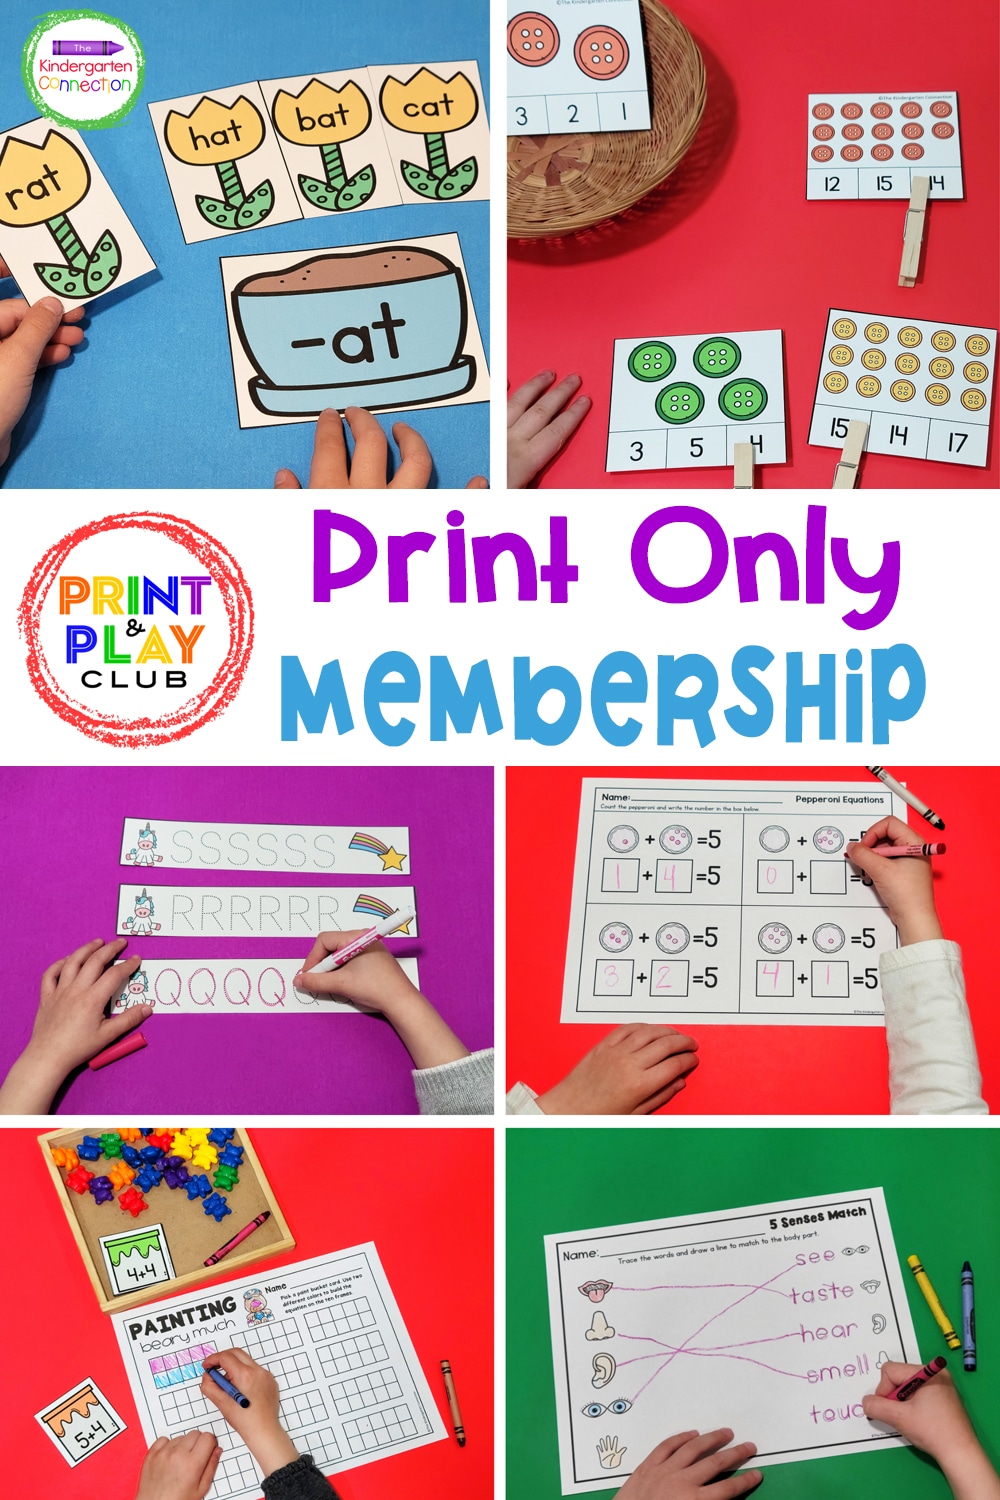 Transform your teaching with ready-to-go resources with the Print and Play Club "Print Only" membership for Pre-K & Kindergarten teachers!